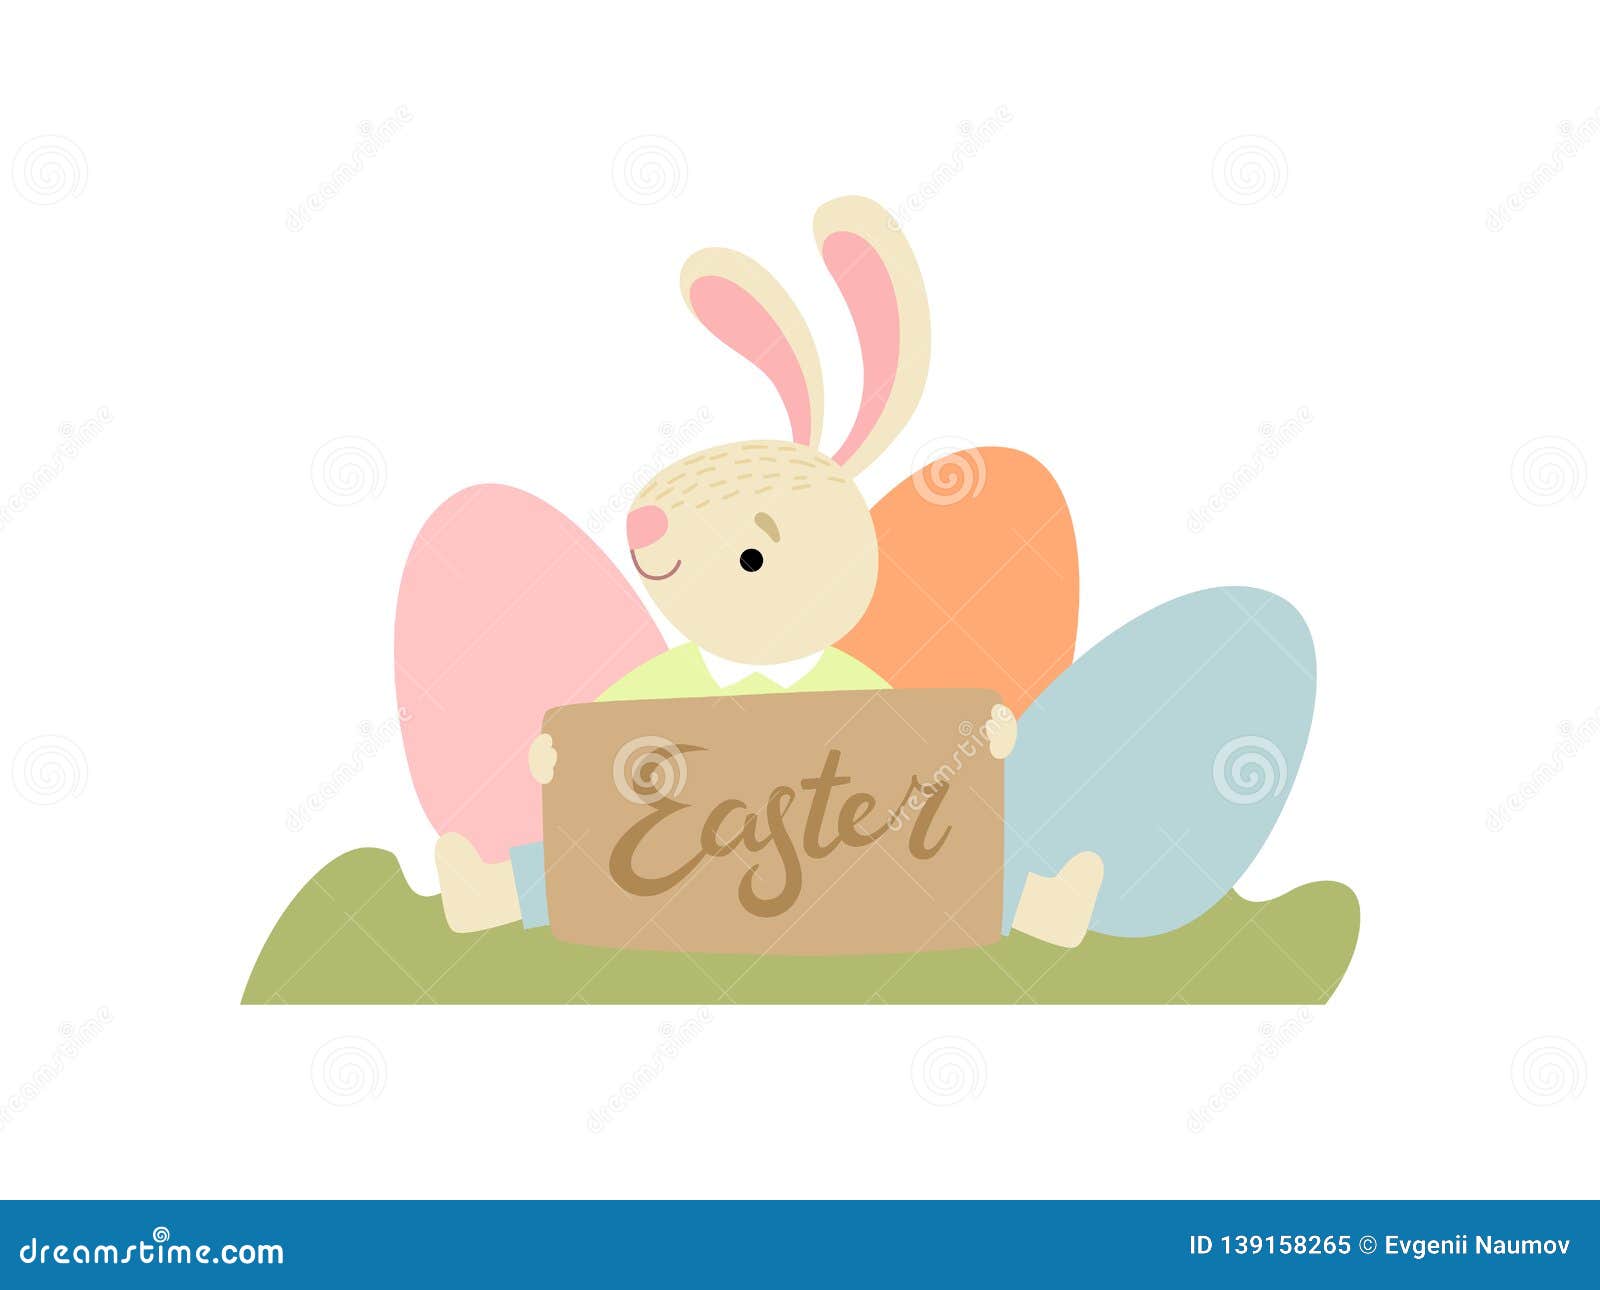 Download Cute Bunny With Eggs, Happy Easter, Design Element For ...